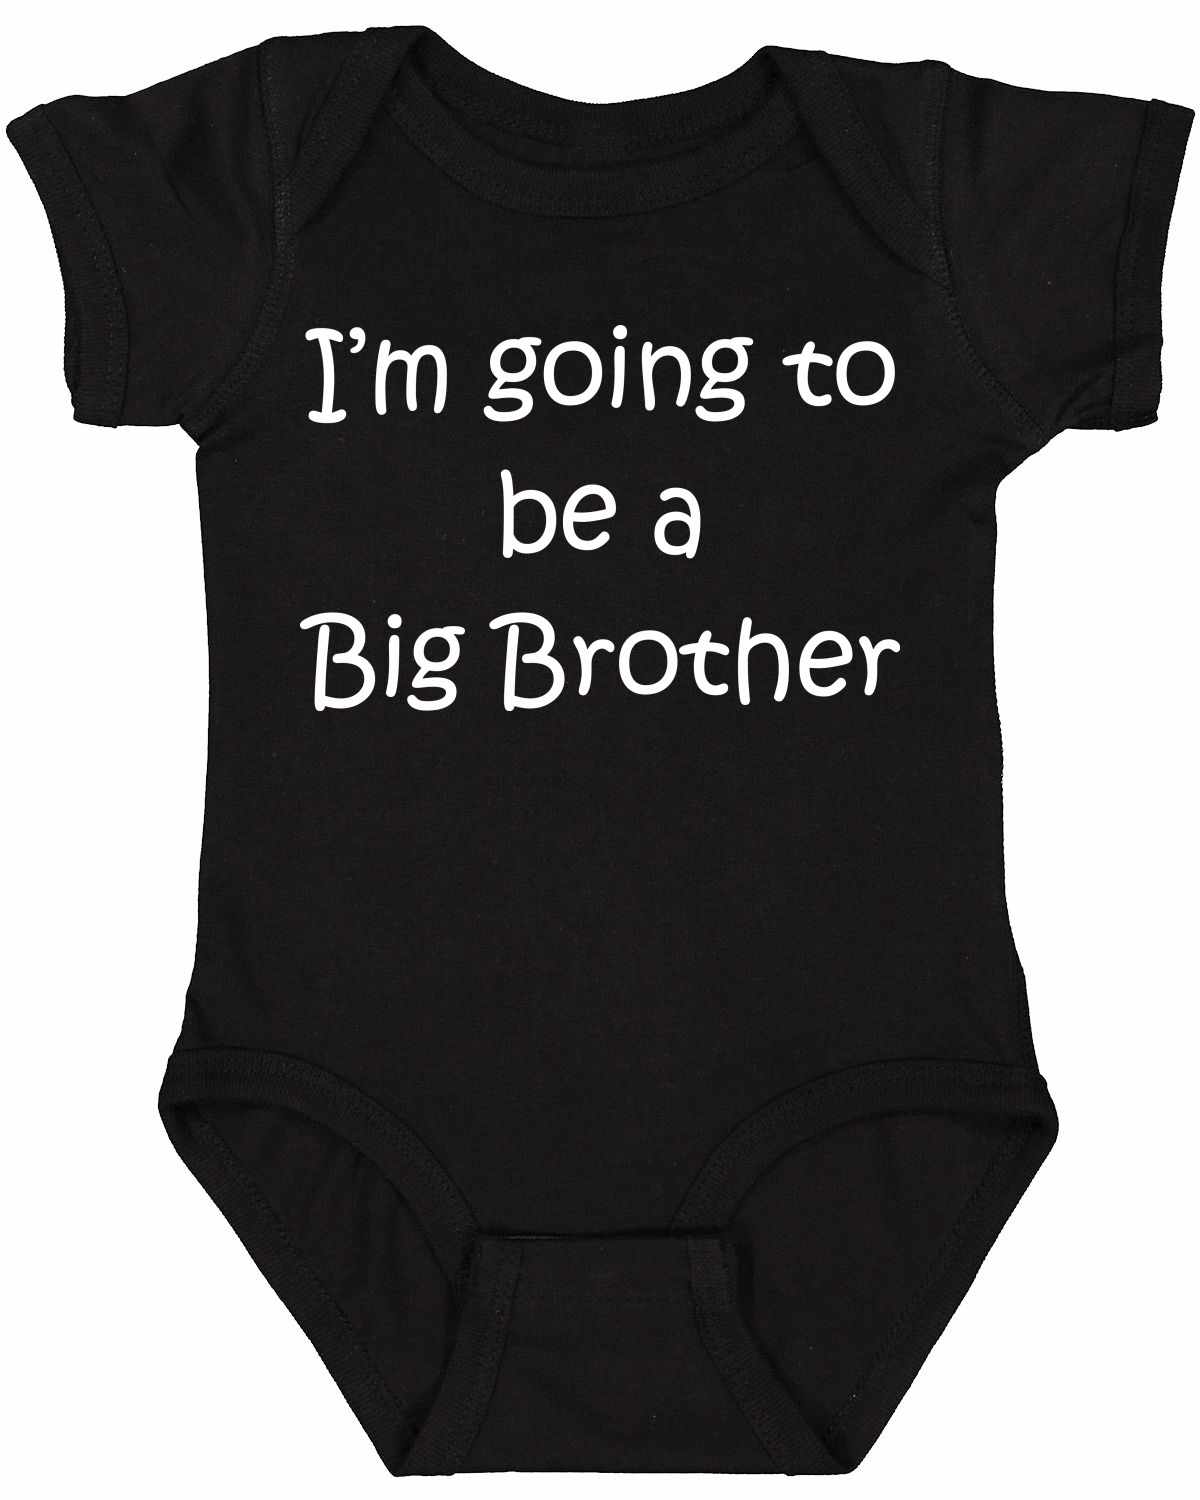 I'M GOING TO BE A BIG BROTHER on Infant BodySuit